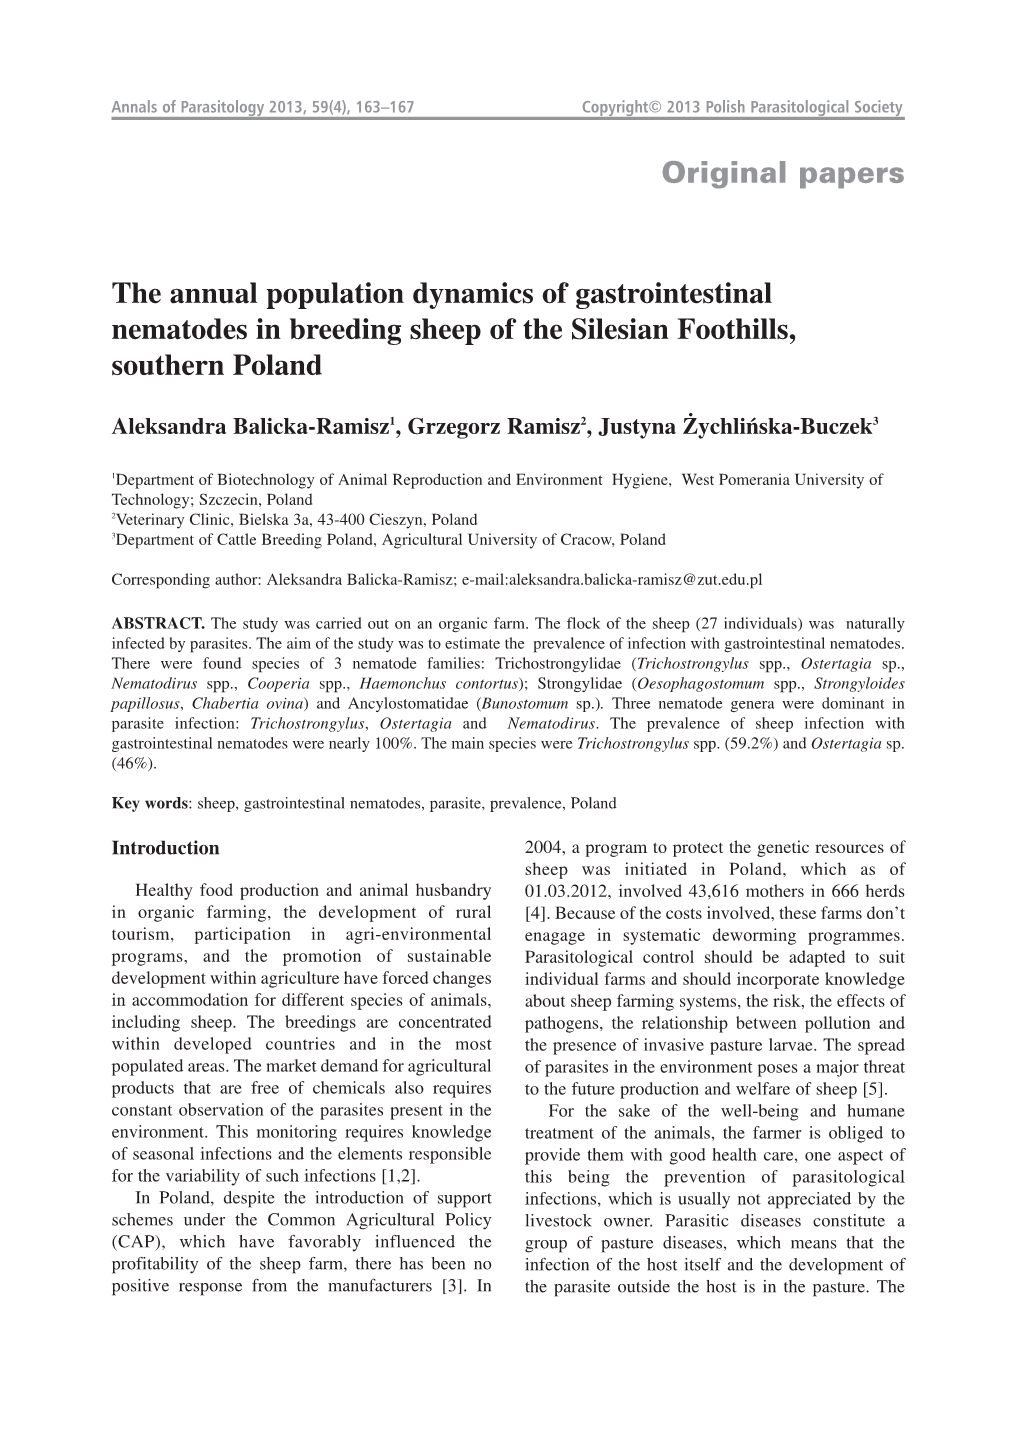 Original Papers the Annual Population Dynamics of Gastrointestinal Nematodes in Breeding Sheep of the Silesian Foothills, Southe